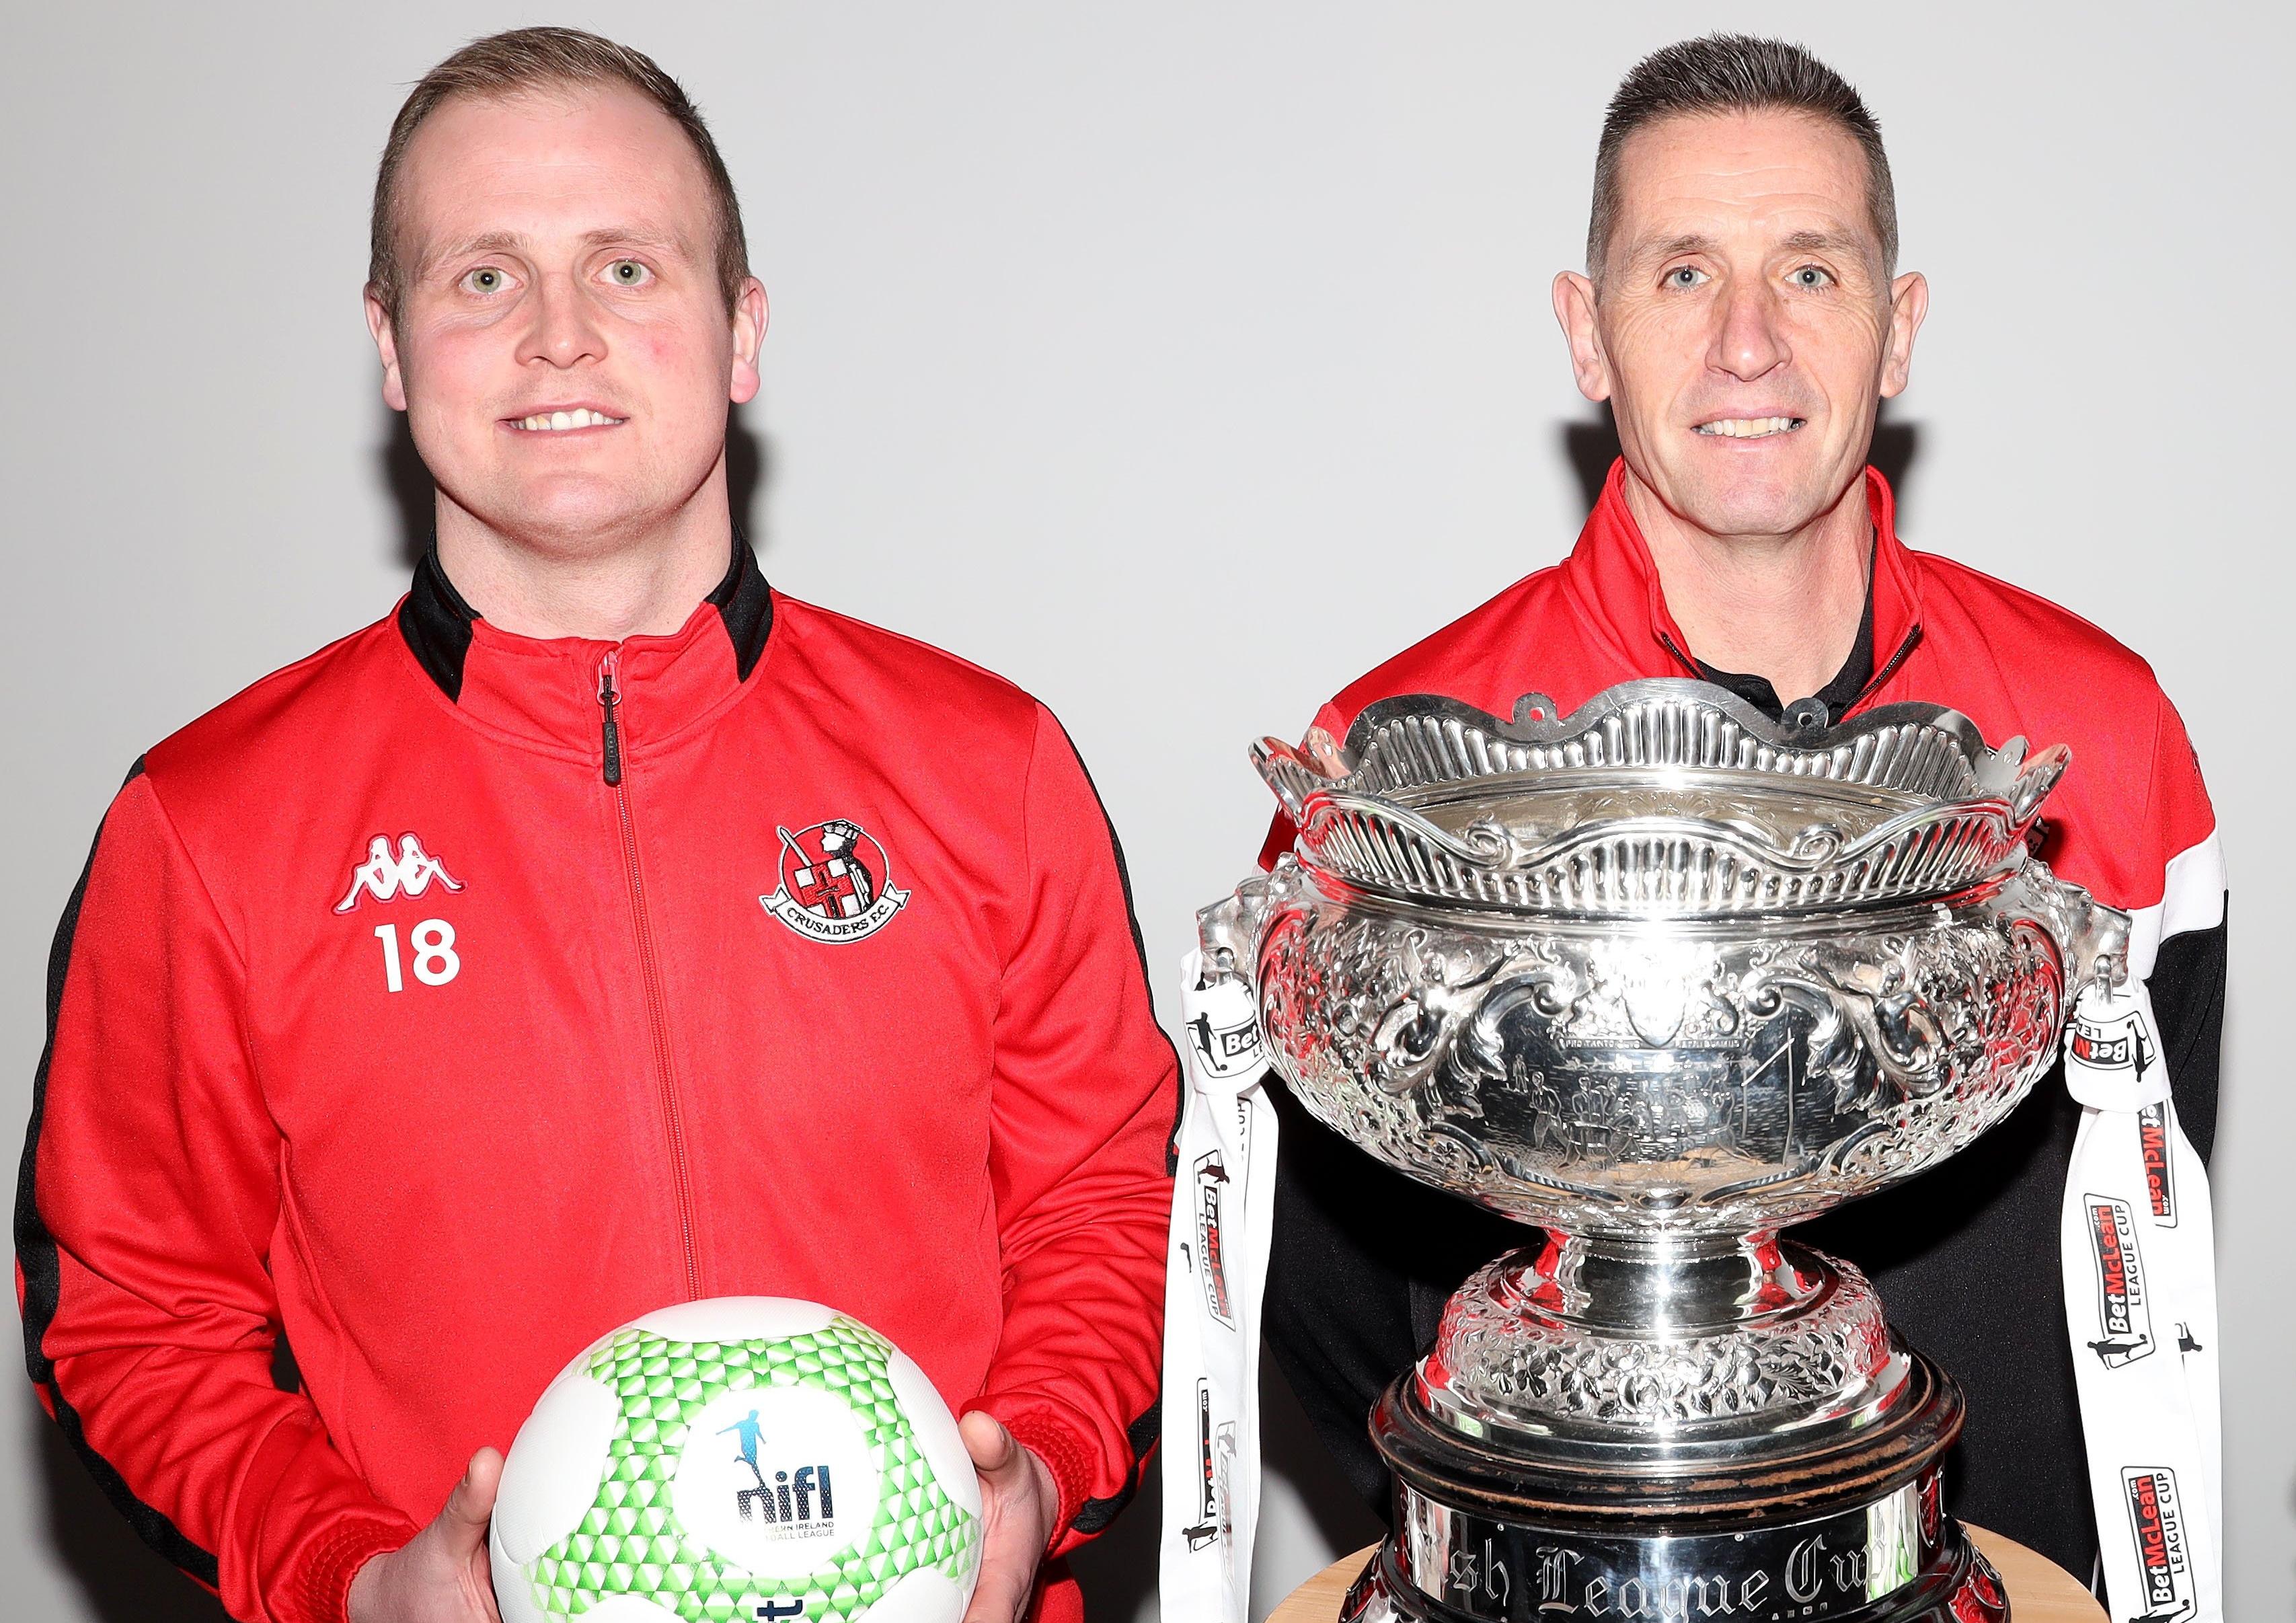 Crusaders striker Jordan Owens (left) and manager Stephen Baxter in front of the League Cup trophy. Pic by Pacemaker.